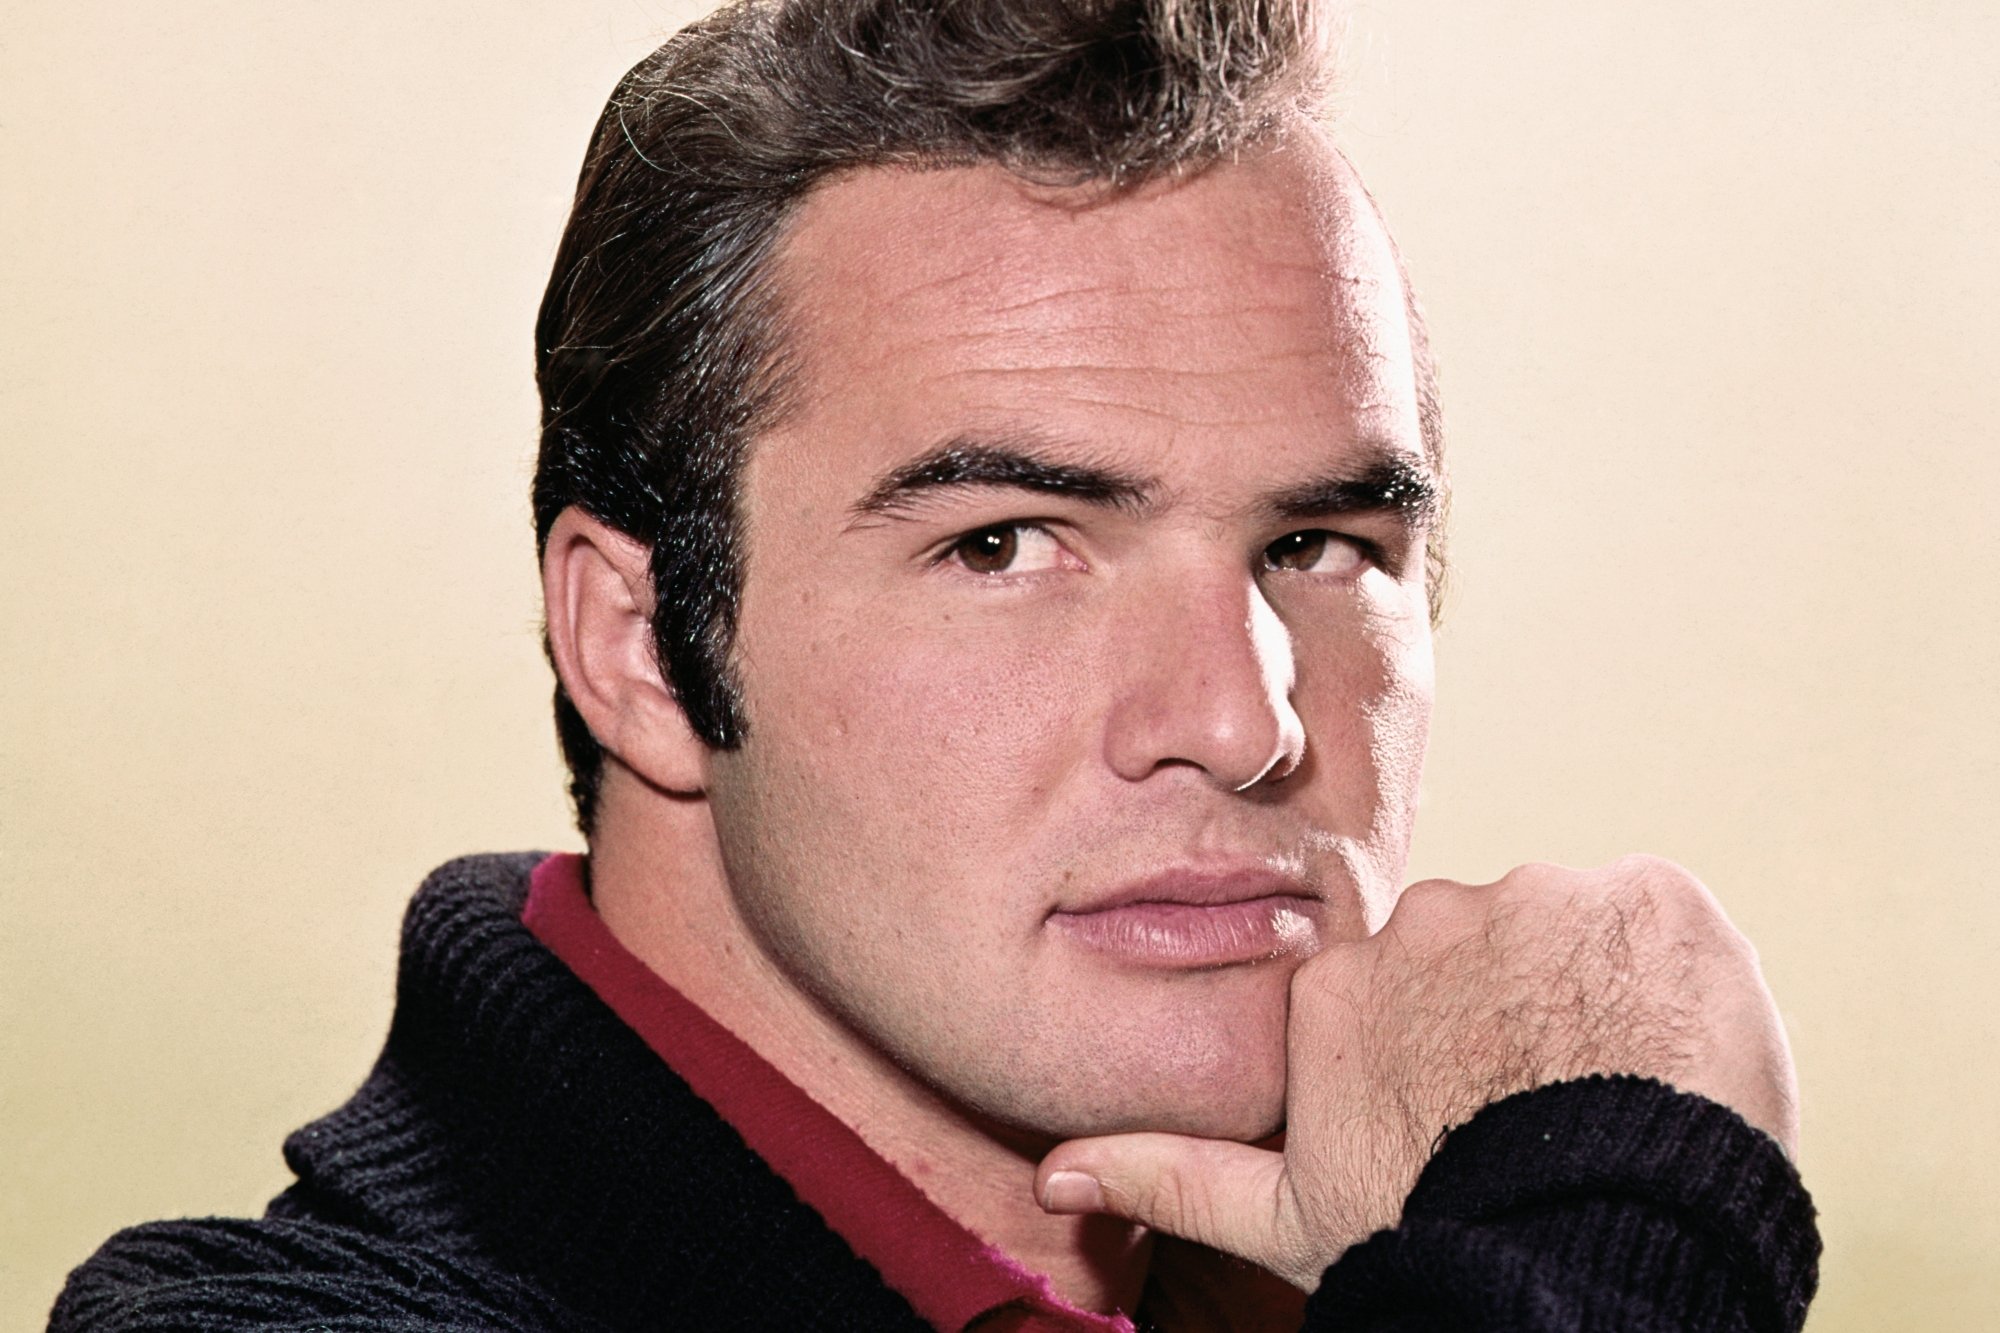 'Gunsmoke' Burt Reynolds holding his thumb under his chin in front of a blank background